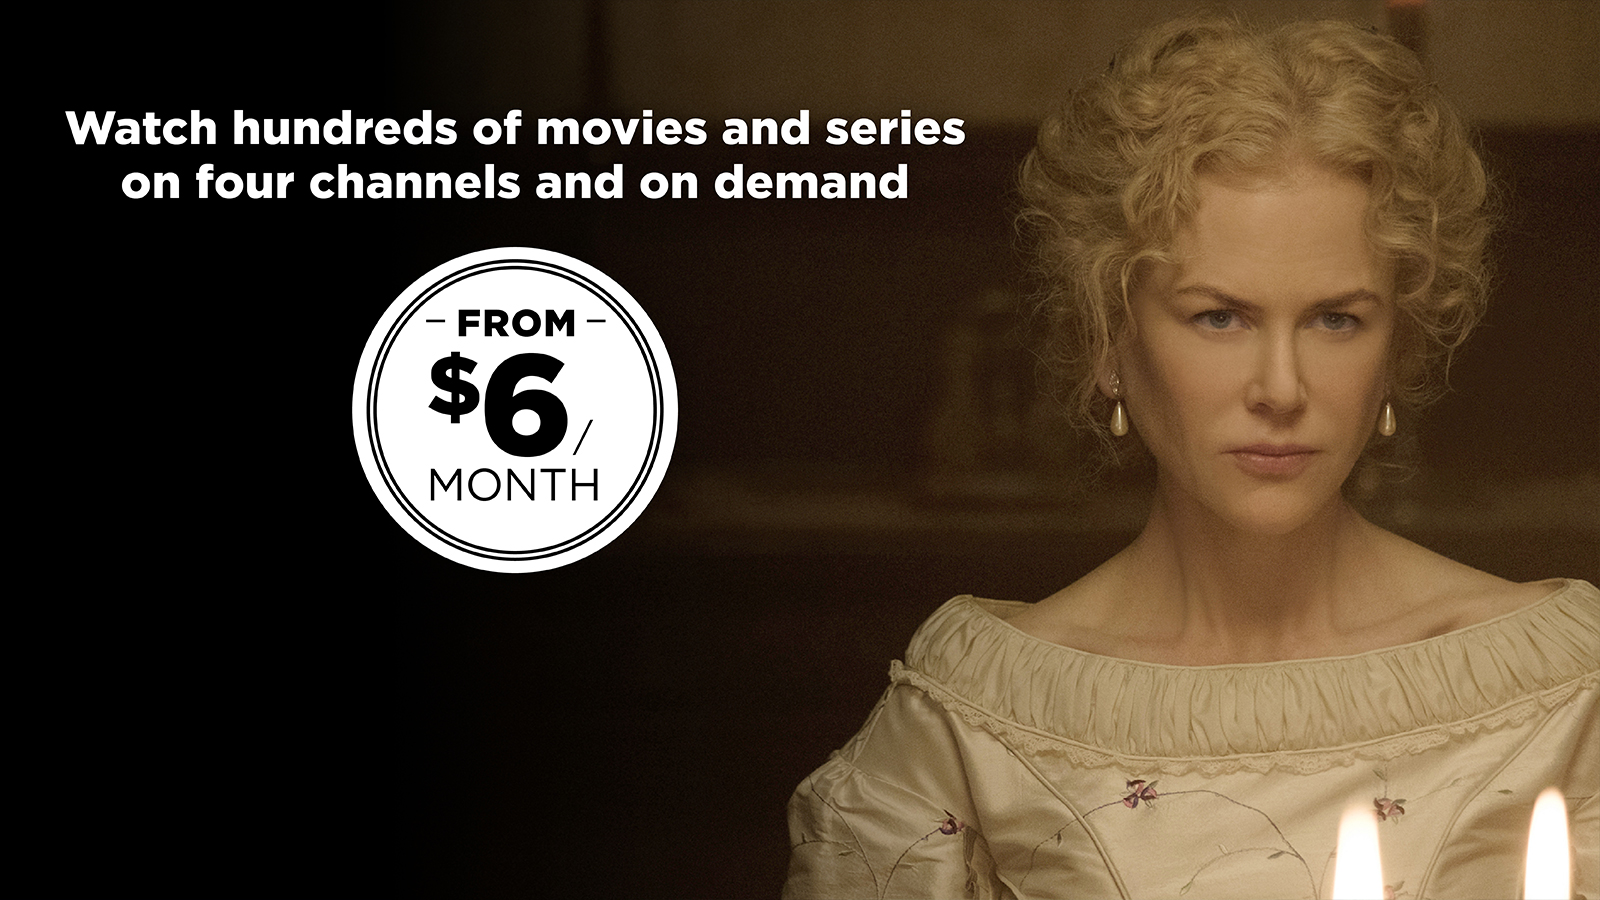 Watch hundreds of movies and series on four channels and on demand from $6/month